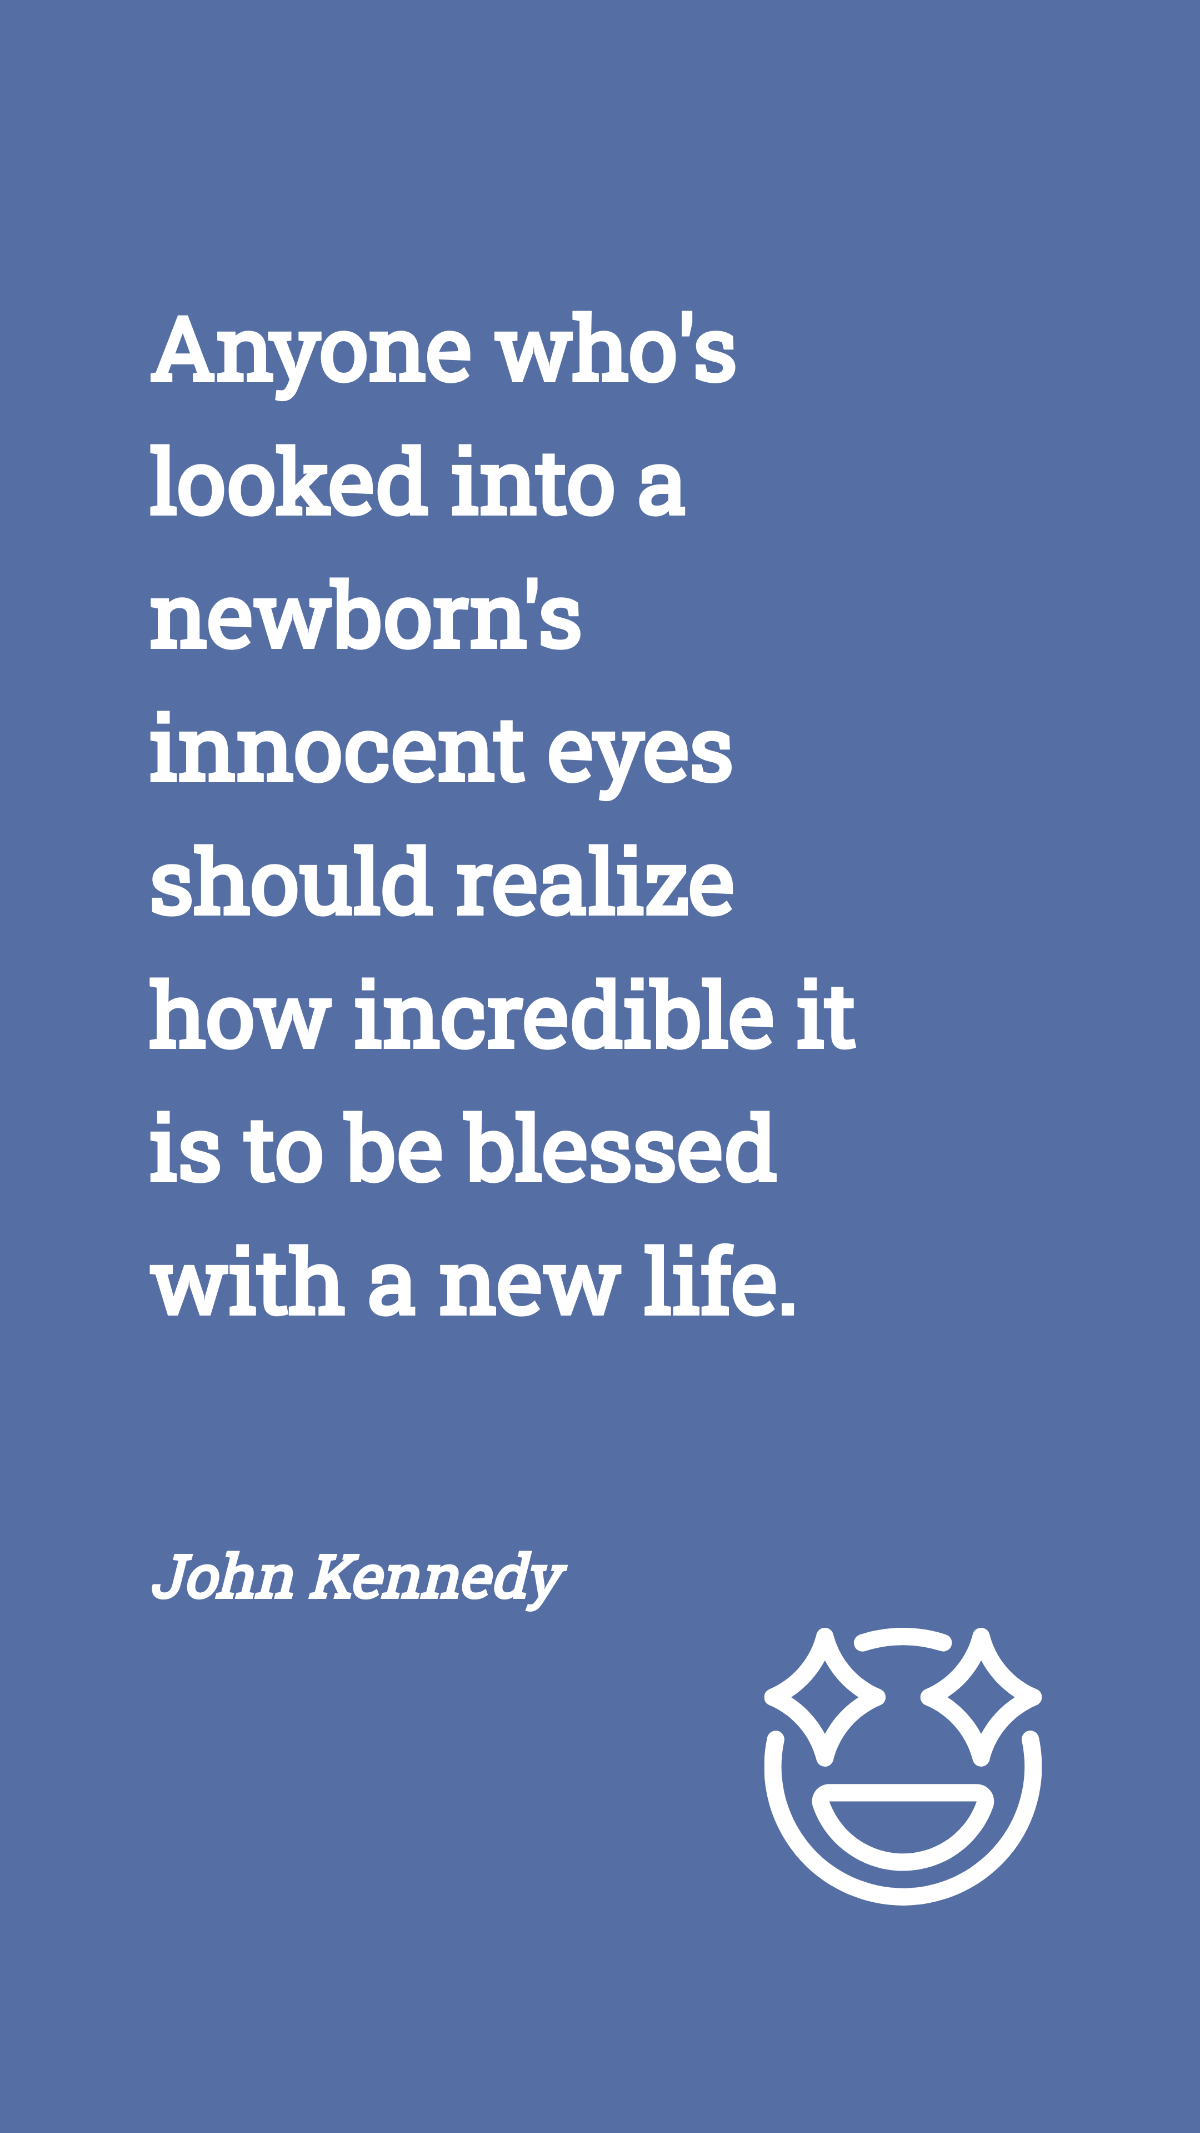 John Kennedy - Anyone who's looked into a newborn's innocent eyes should realize how incredible it is to be blessed with a new life. Template